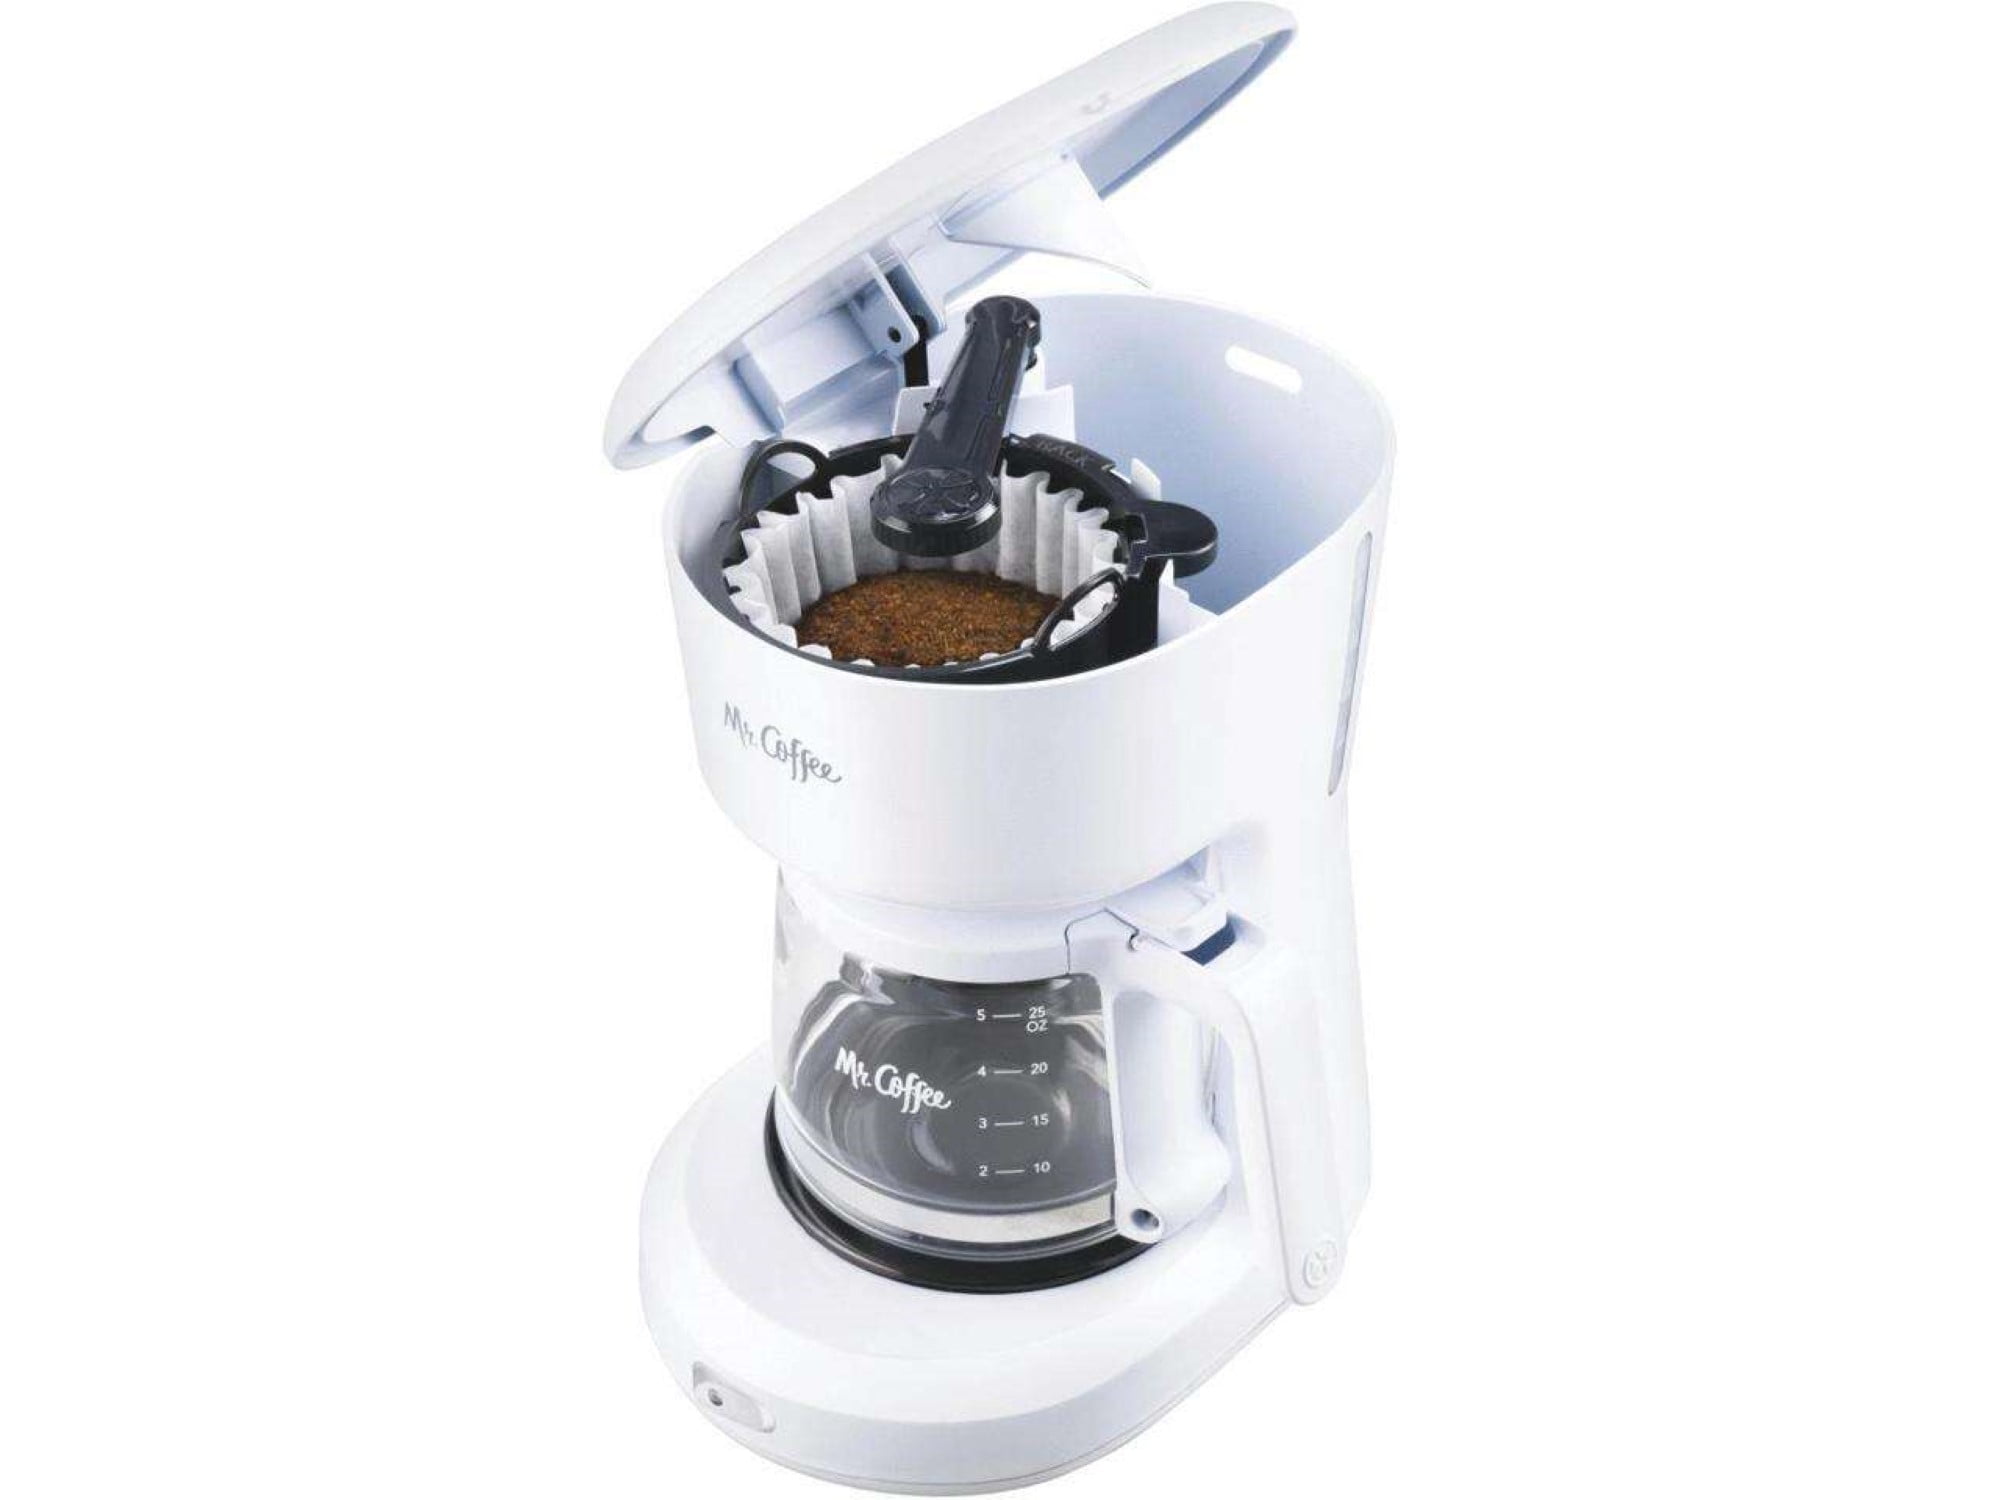 Commercial Chef 5-Cup Drip Coffee Maker, White